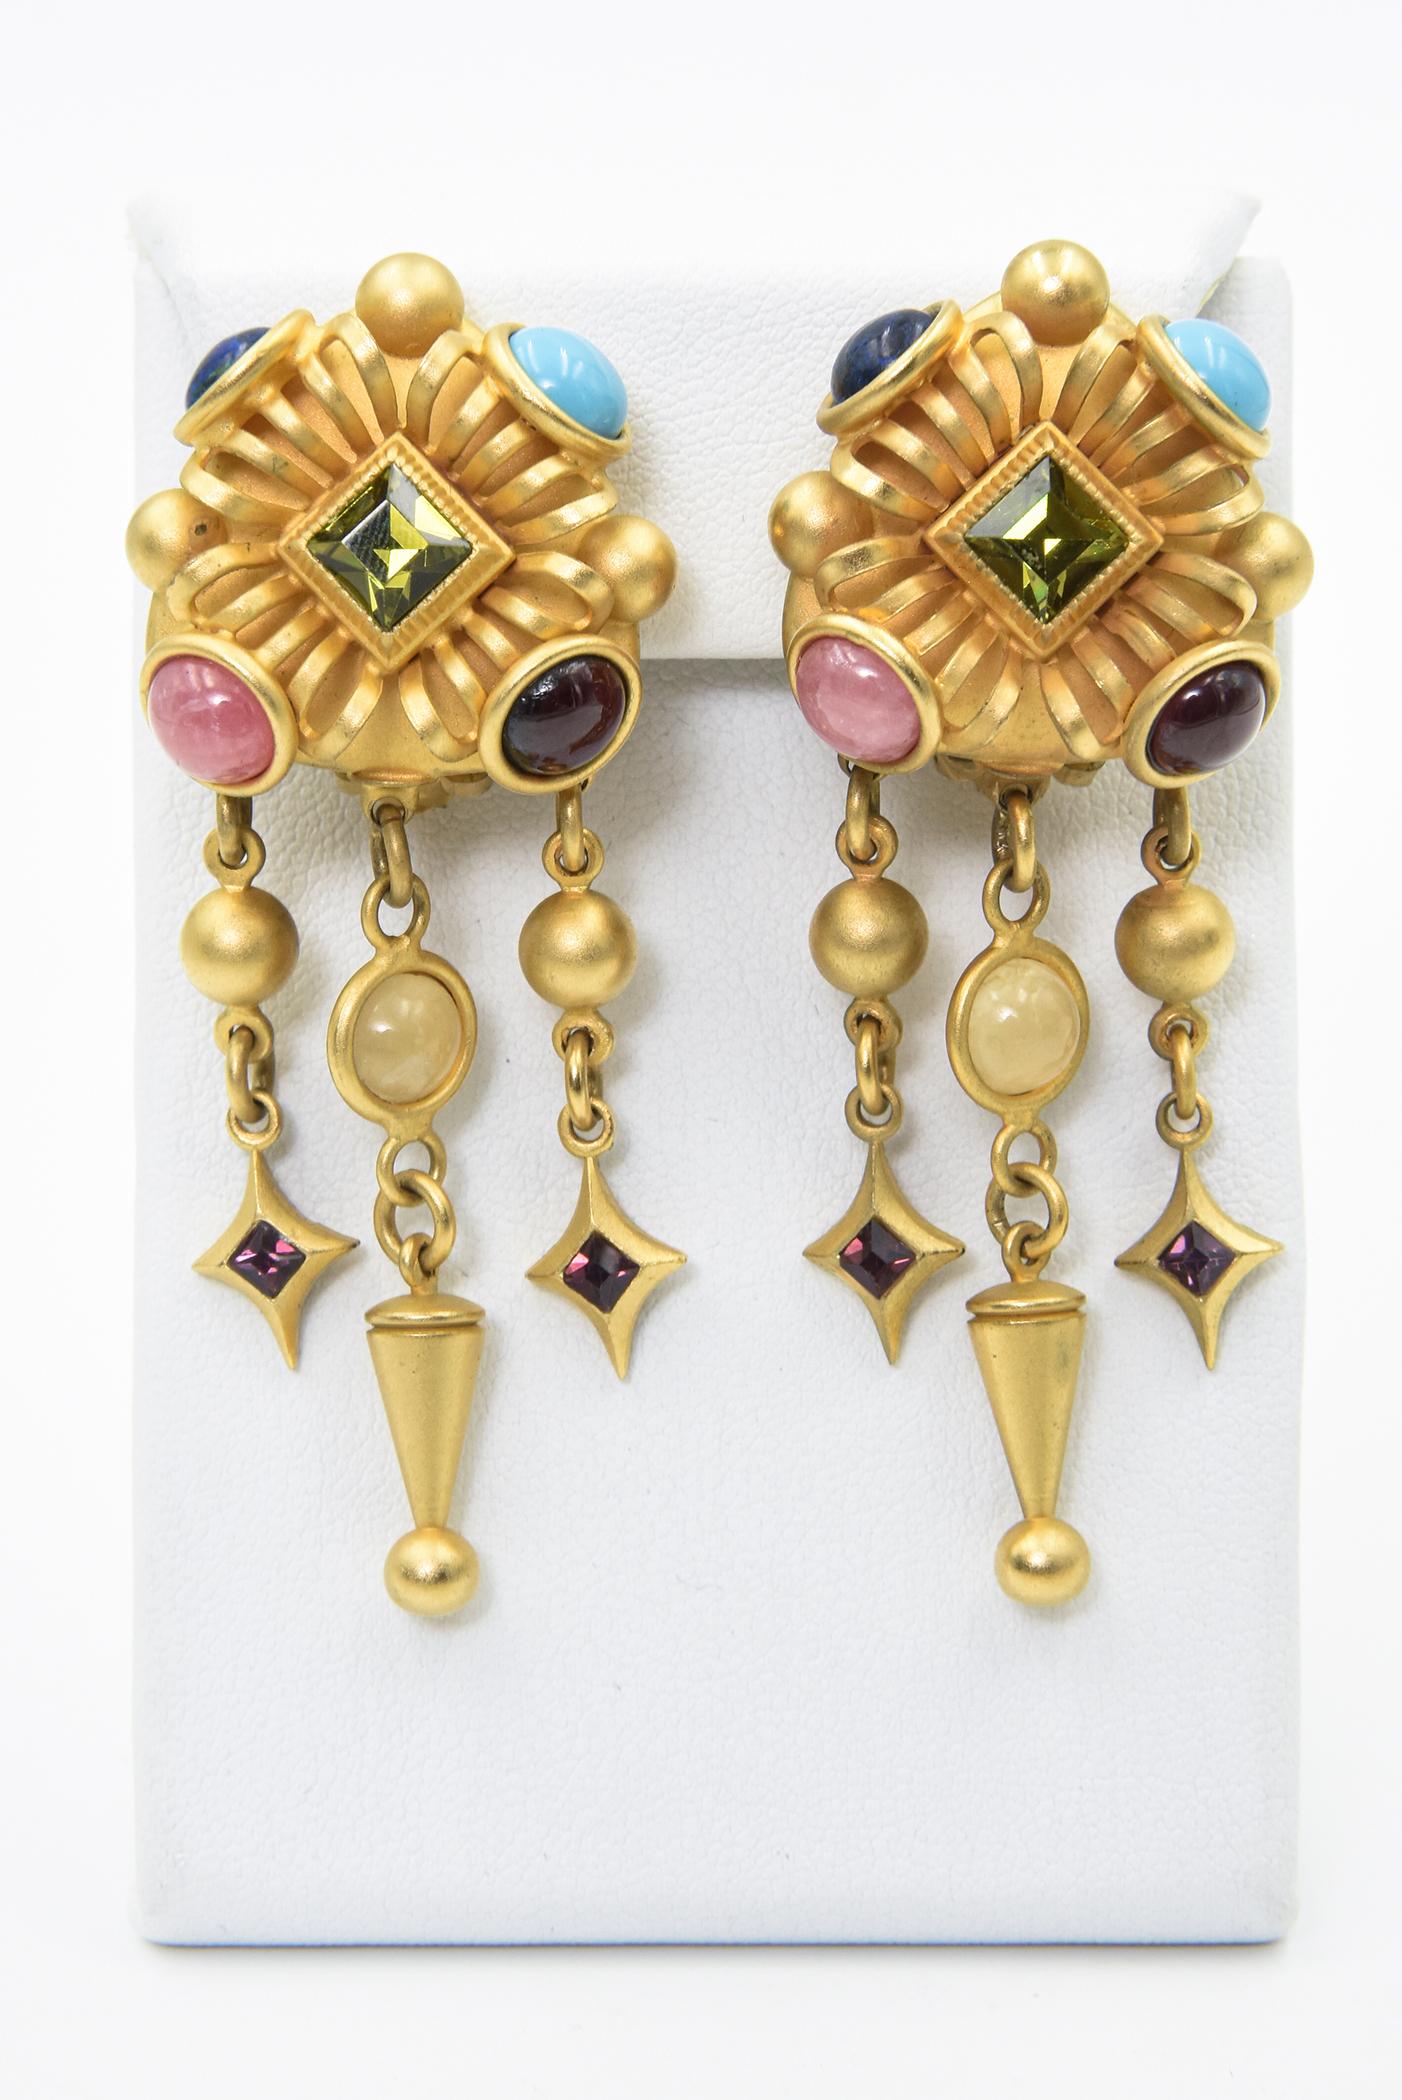 Vintage 20th Century Natasha Stambouli 24K gold-plated brass chandelier earrings. Set with lapis lazuli, garnet, amazonite, and quartz cabochons; accented with Austrian crystals. Clip backs. Signed: Natasha Stambouli. Some wear, one replaced